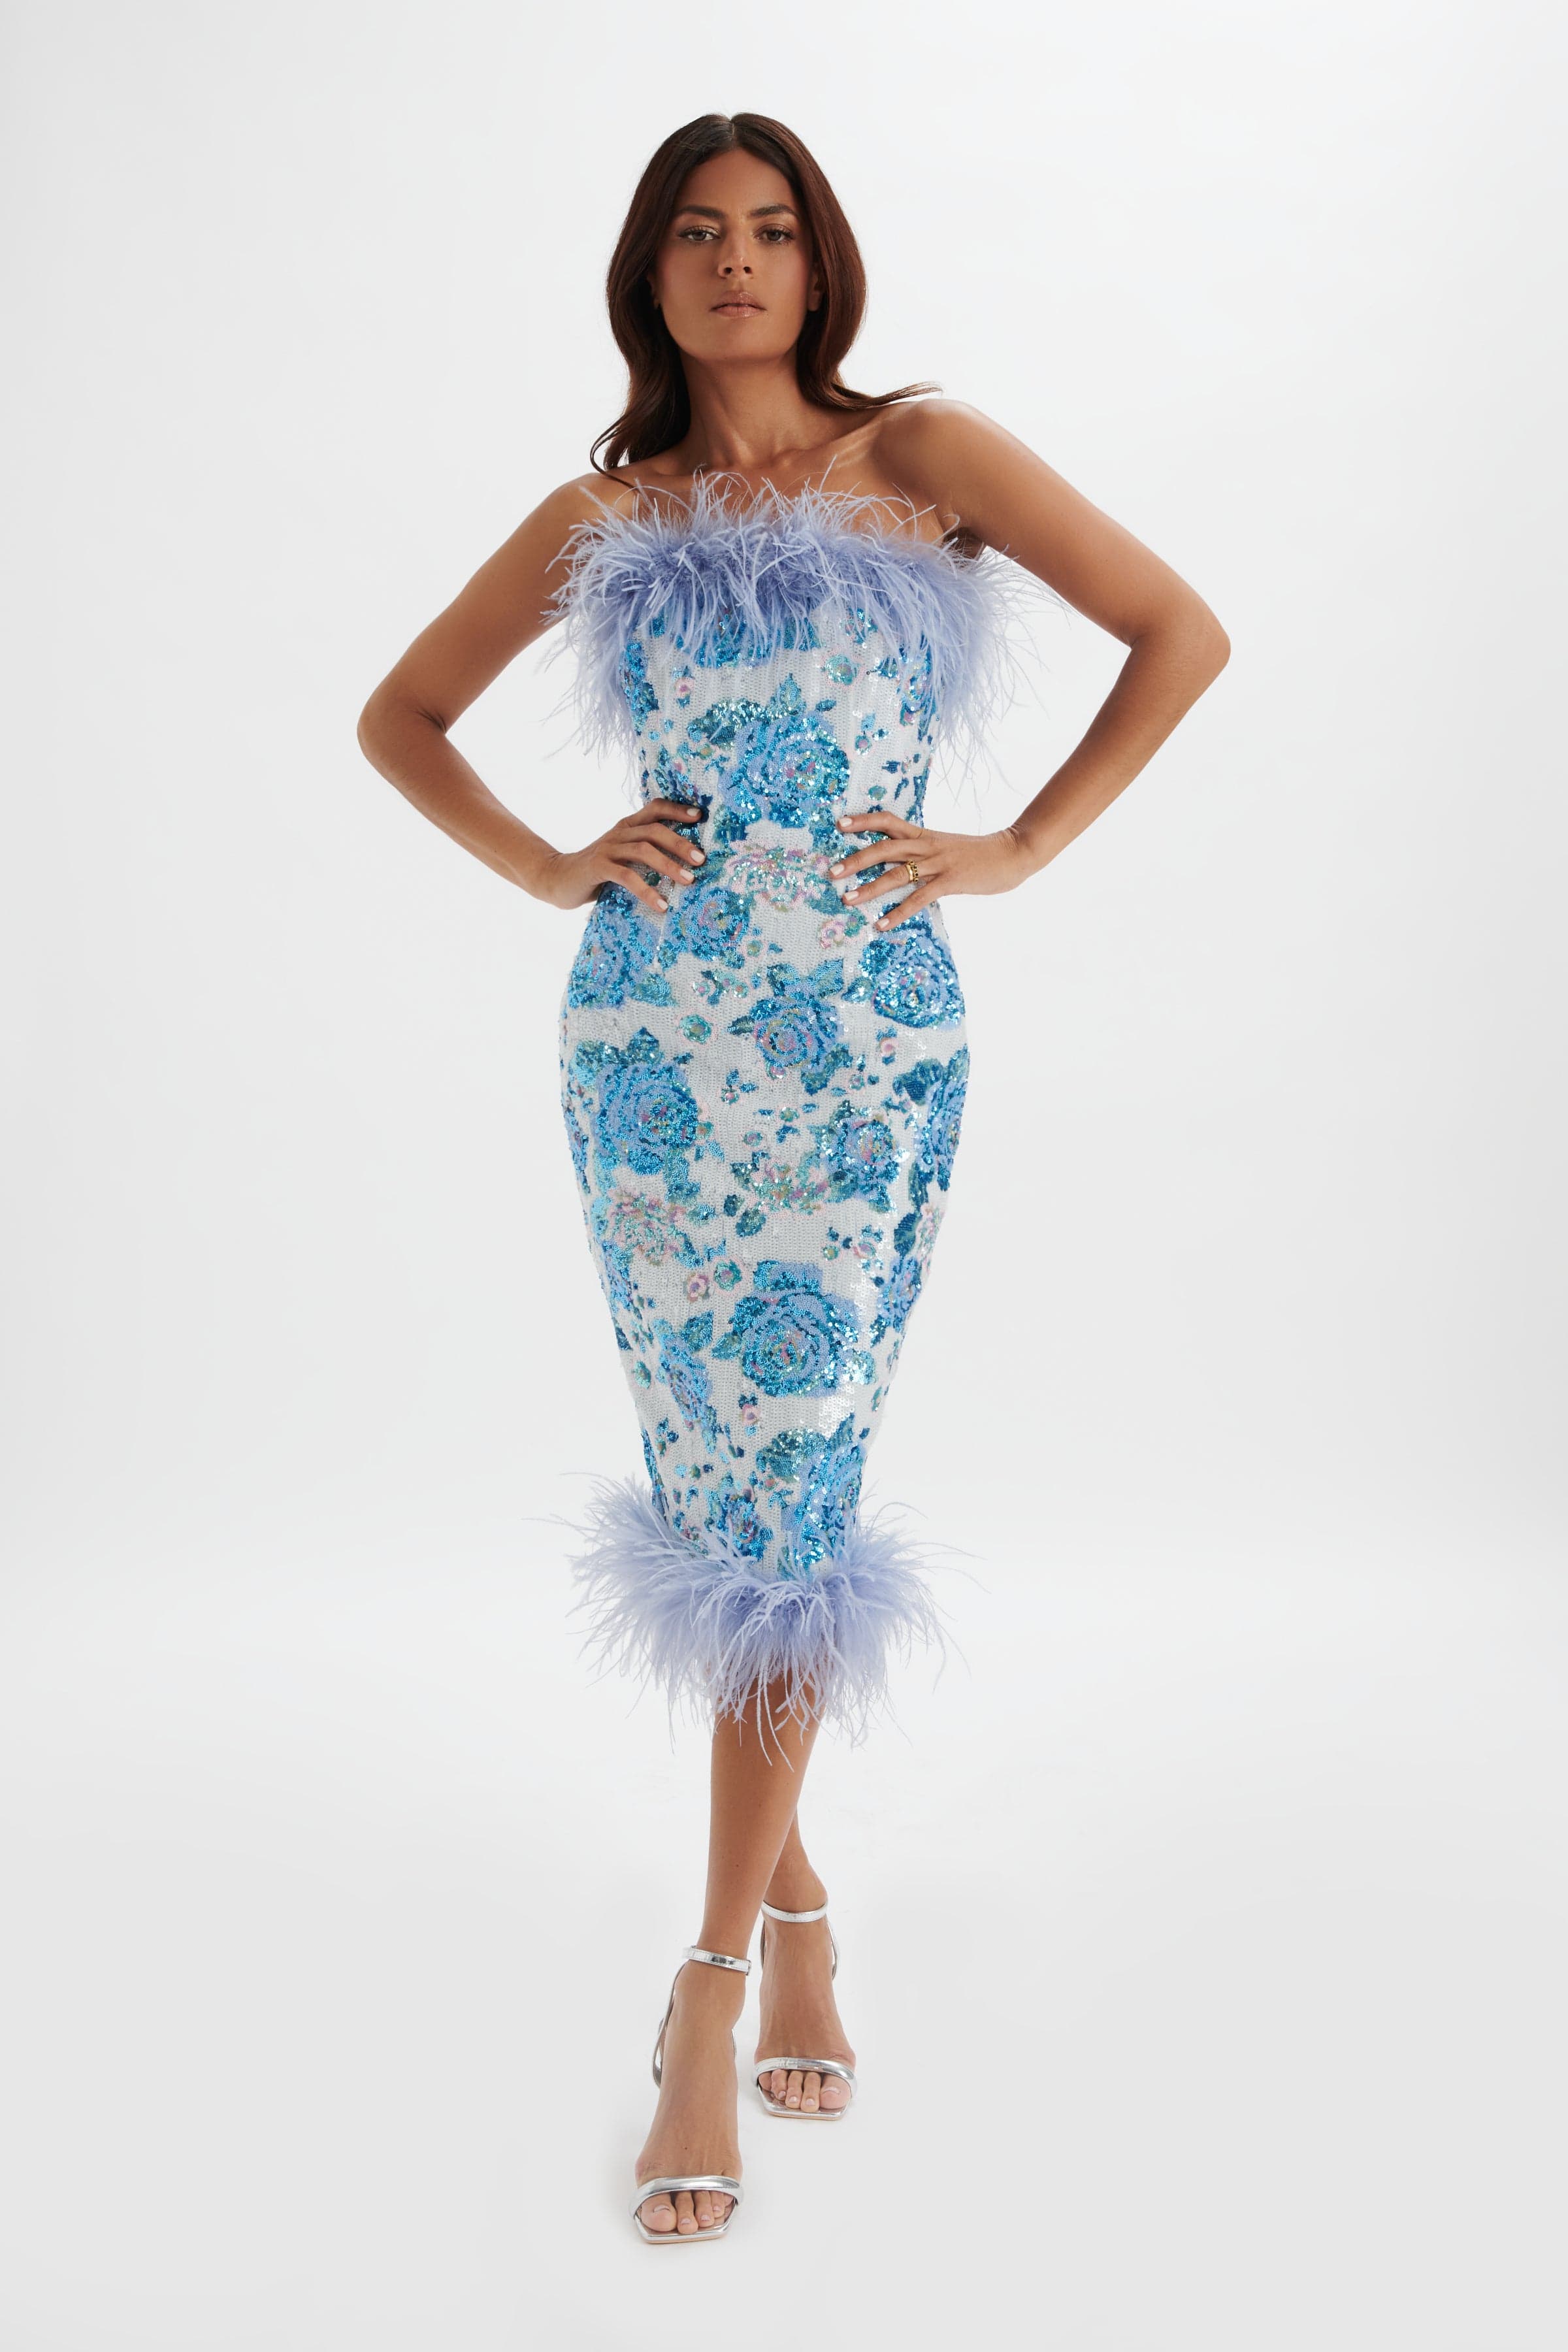 SAMI Feather Bandeau Midi Dress in White and Blue Rose Sequin